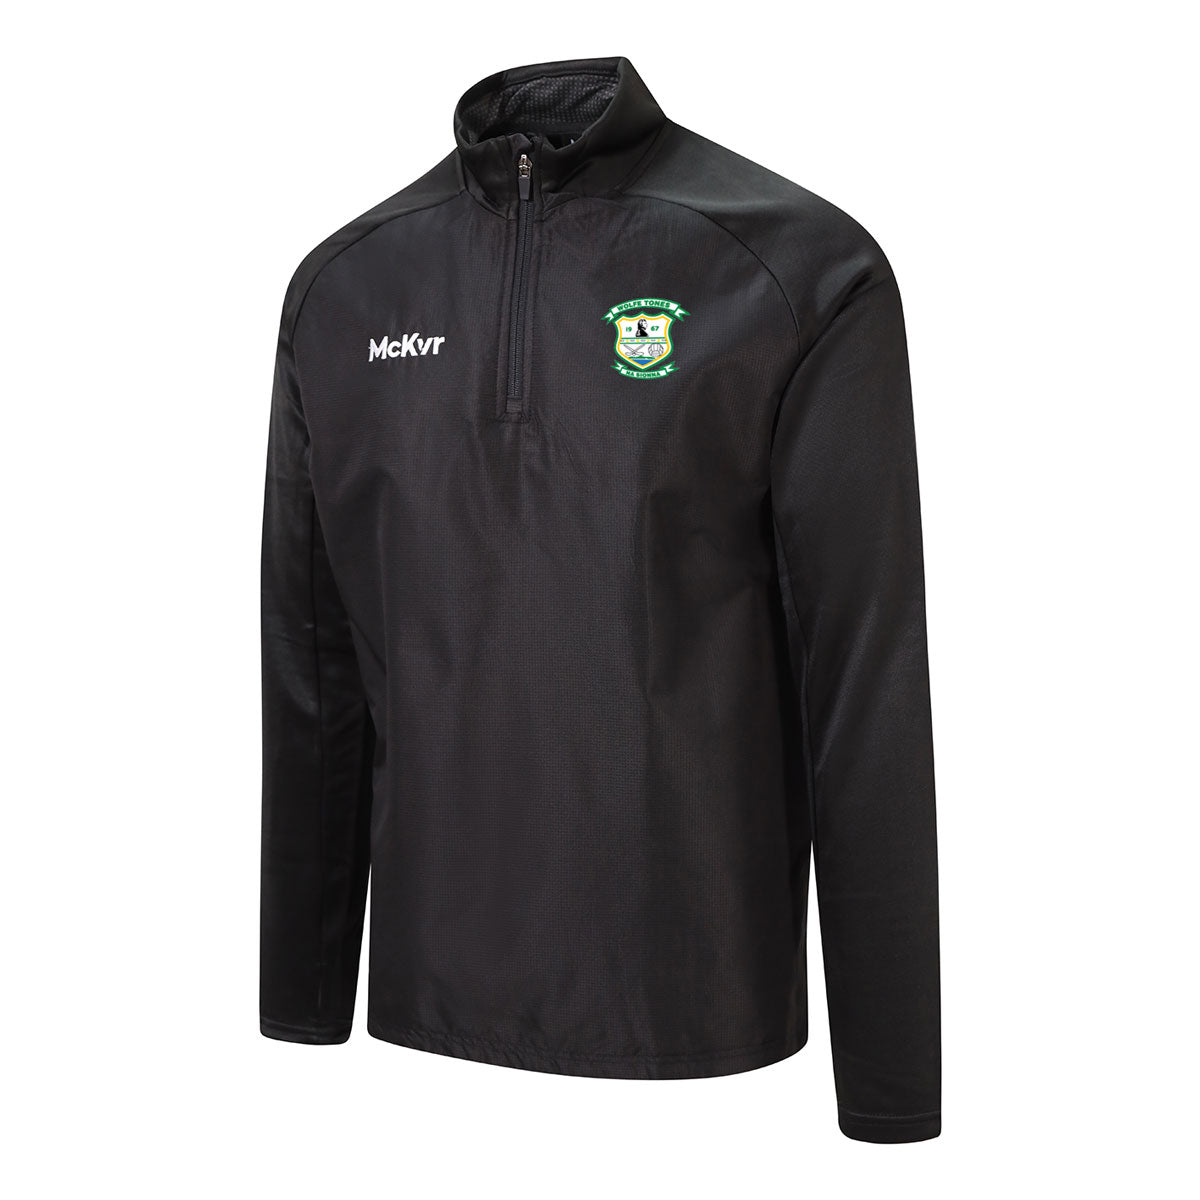 Mc Keever Wolfe Tones Na Sionna, Clare Core 22 Warm Top - Adult - Black